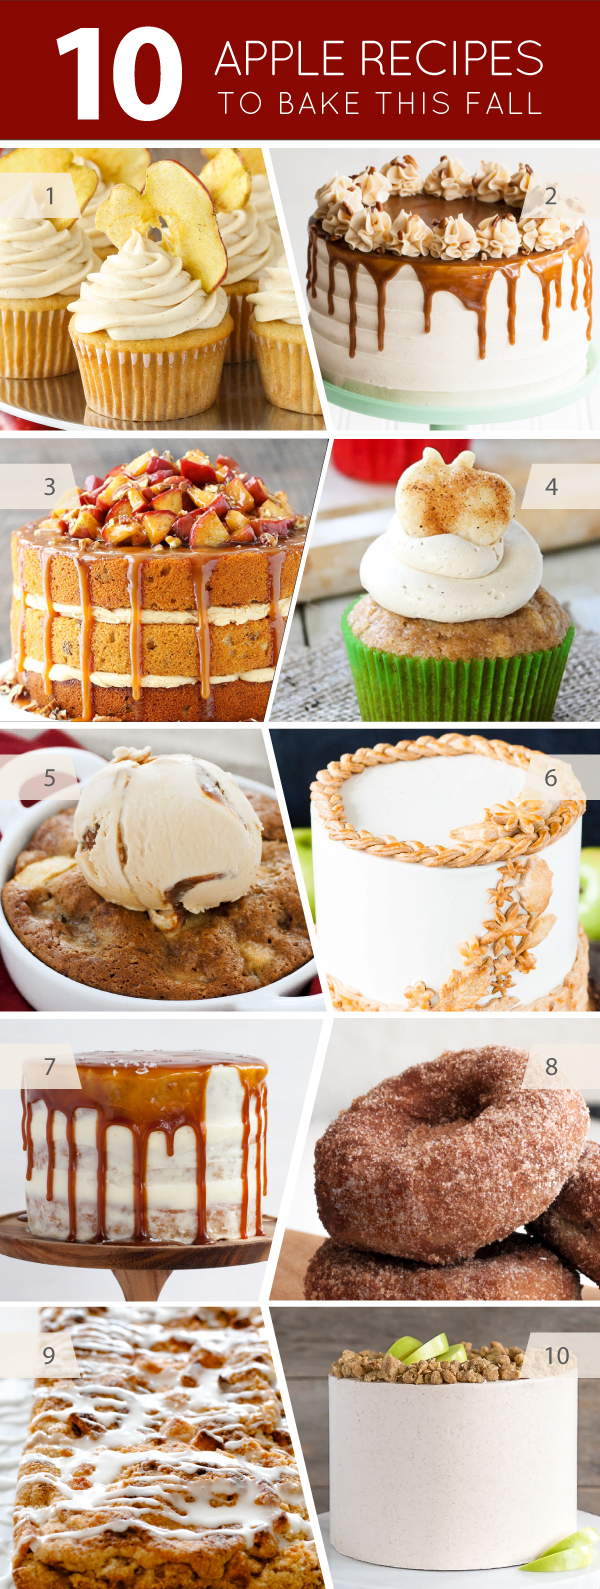 10 Apple Recipes to Bake this Fall | on TheCakeBlog.com